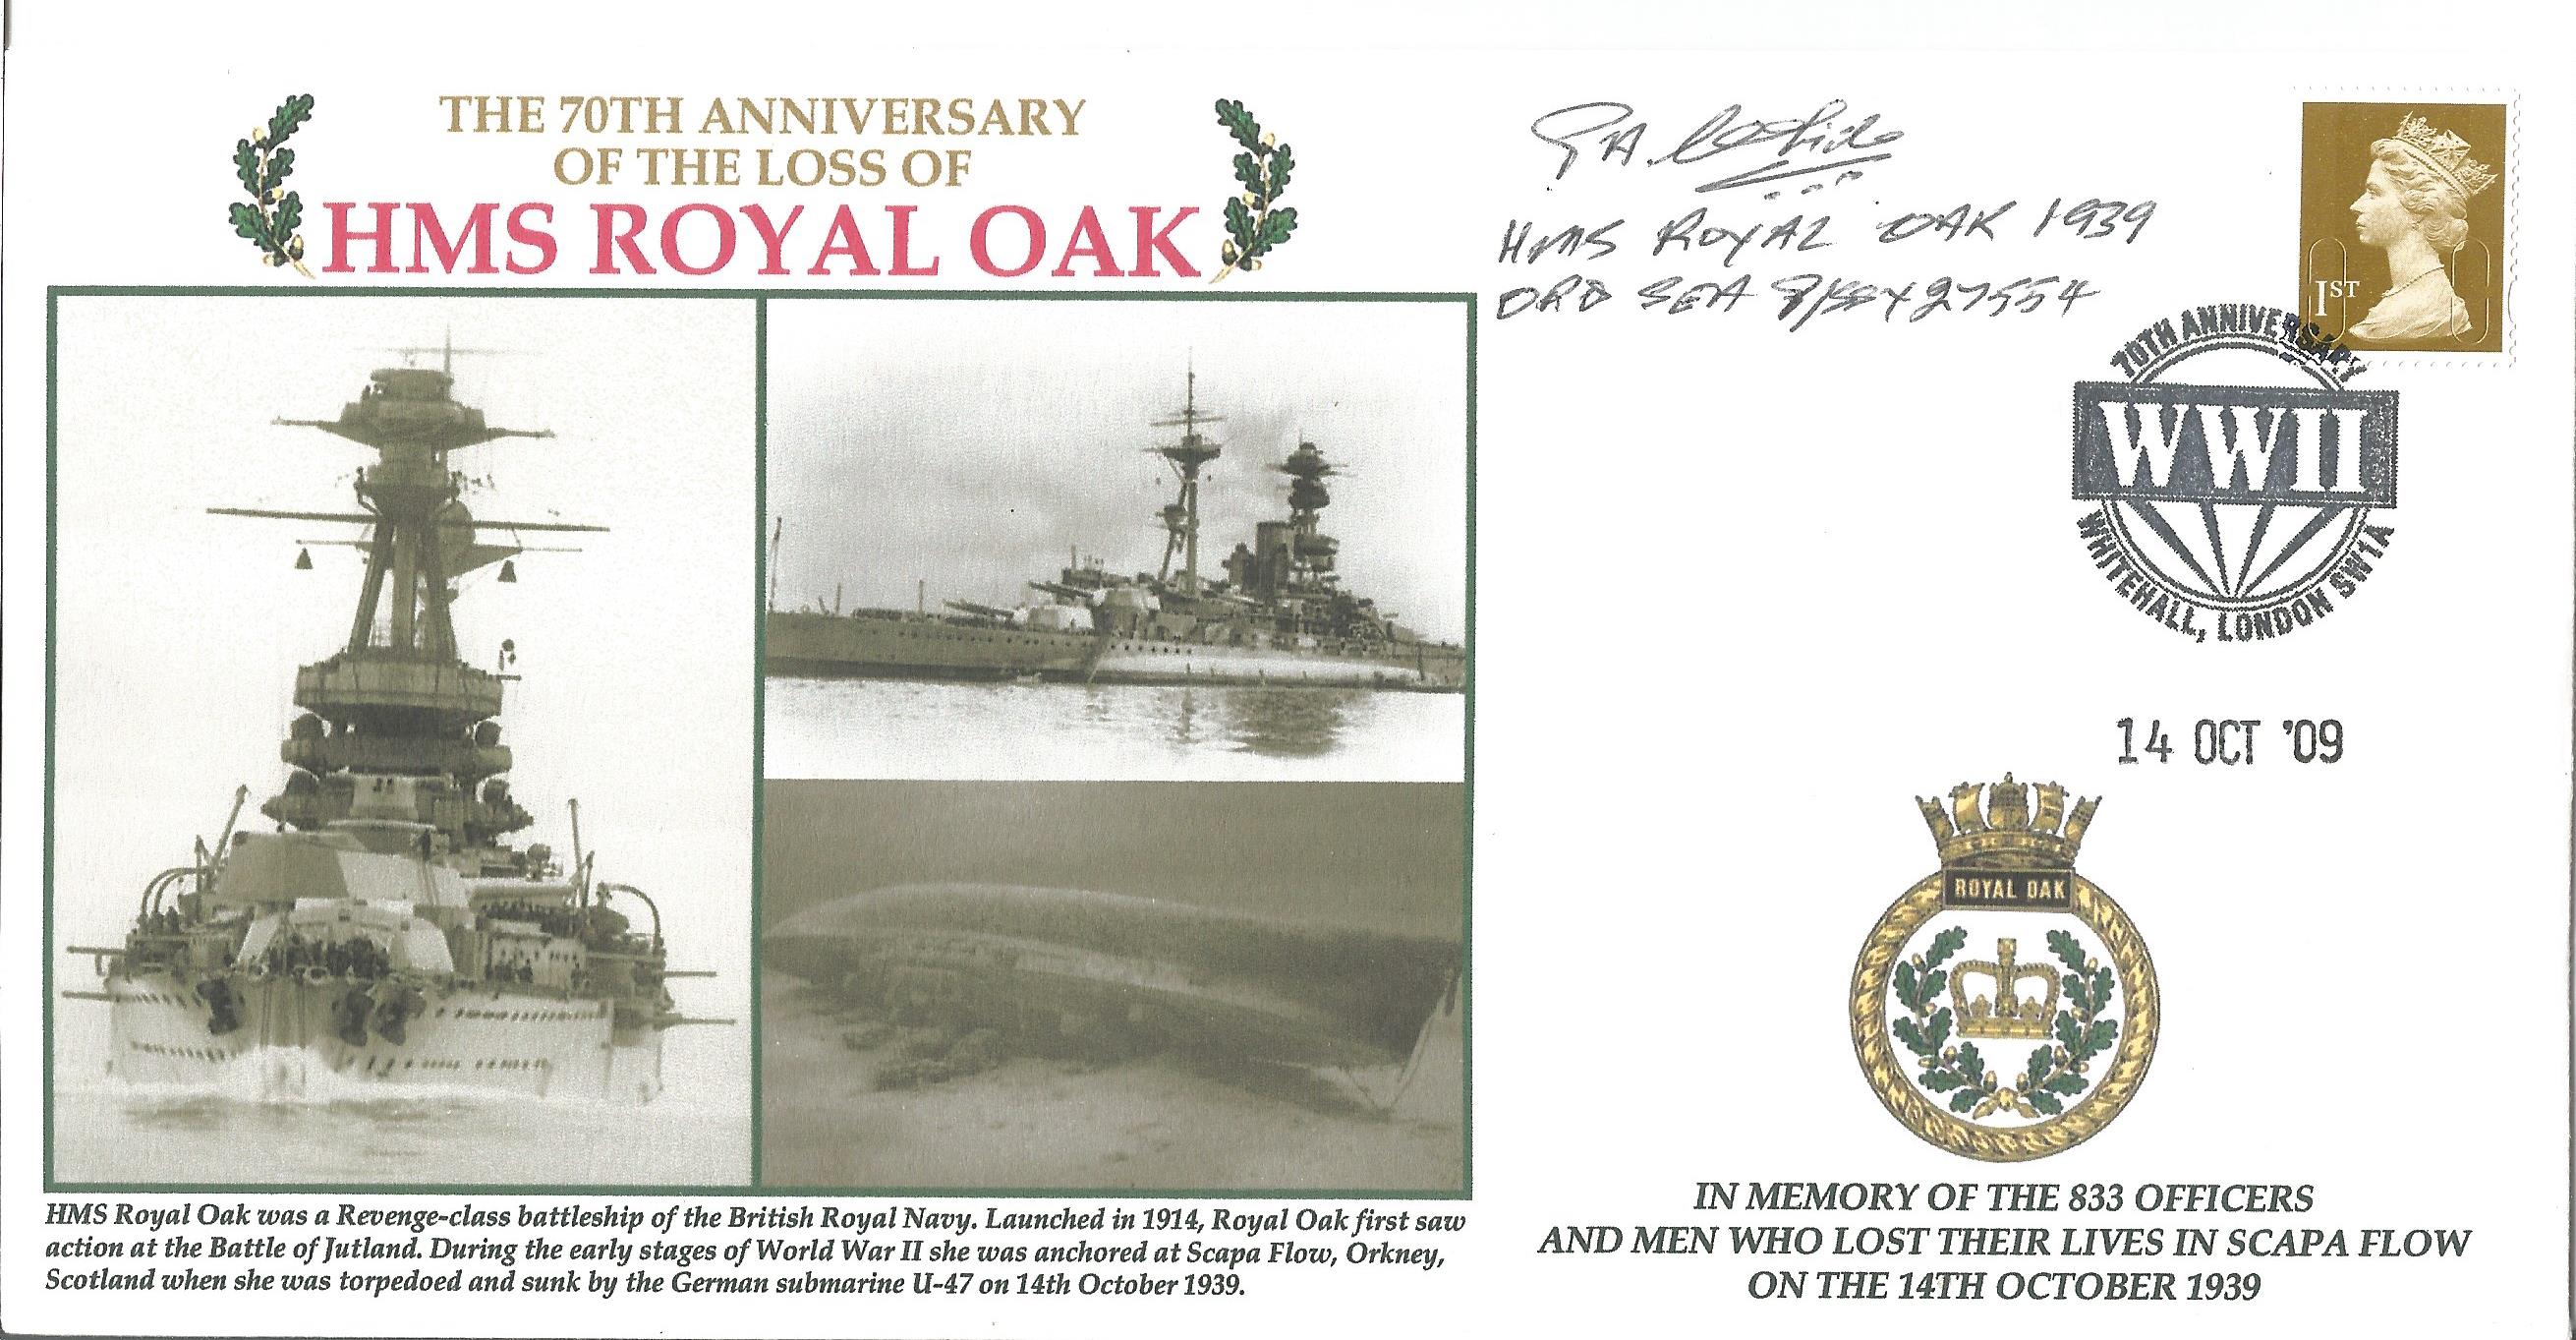 Cdr. Phillip Balink White MBE then Ord Seaman, HMS Royal Oak signed. The 70th Anniversary of the